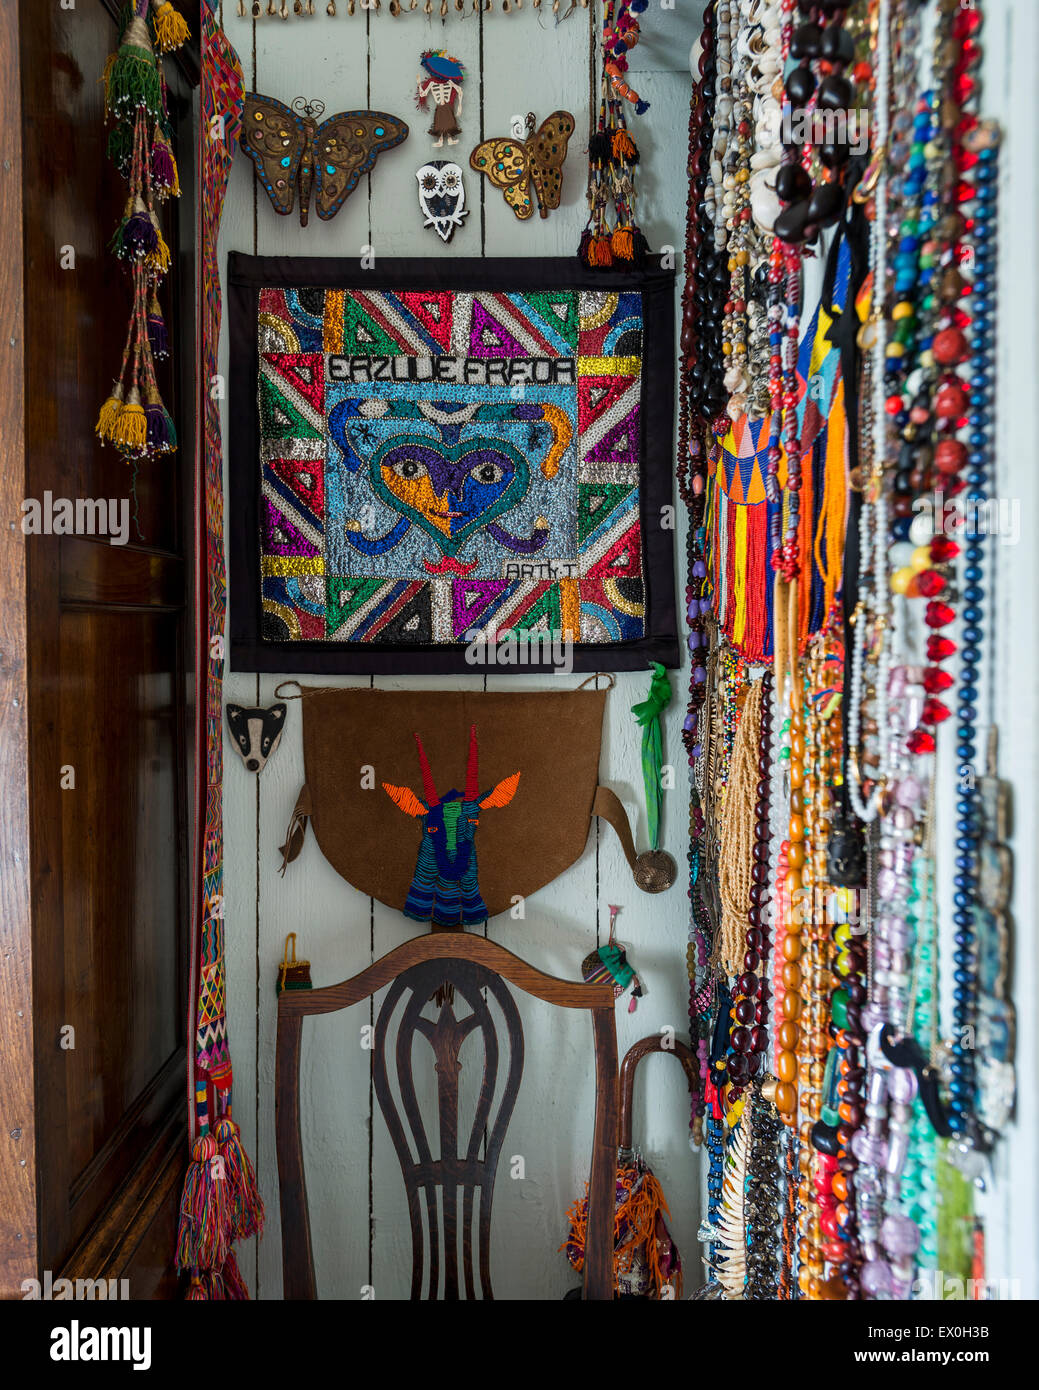 Necklaces and other ethnic jewelery and artwork hung from wall Stock Photo